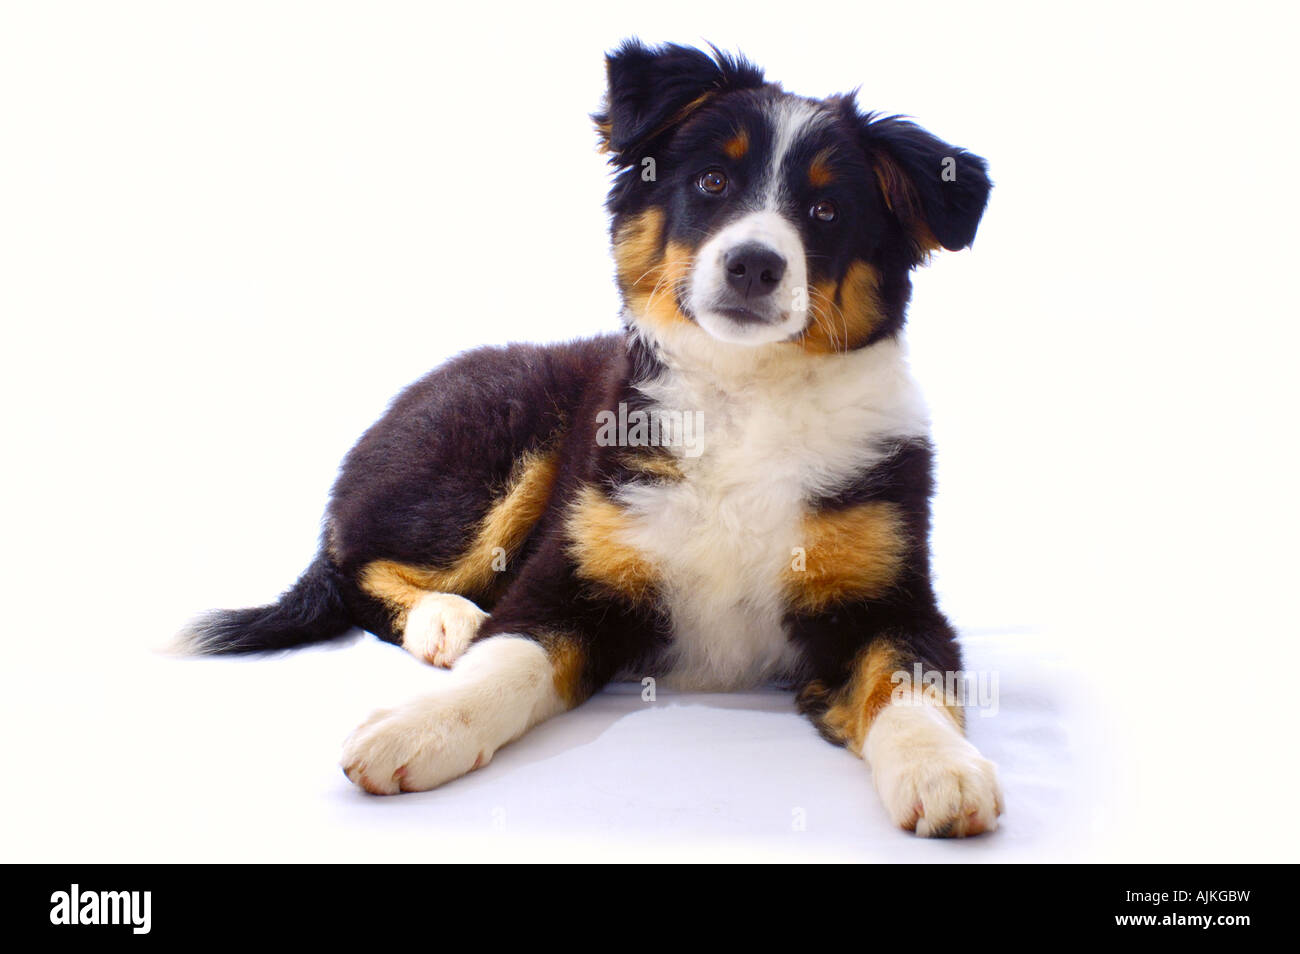 Puppy, isolated on white Stock Photo